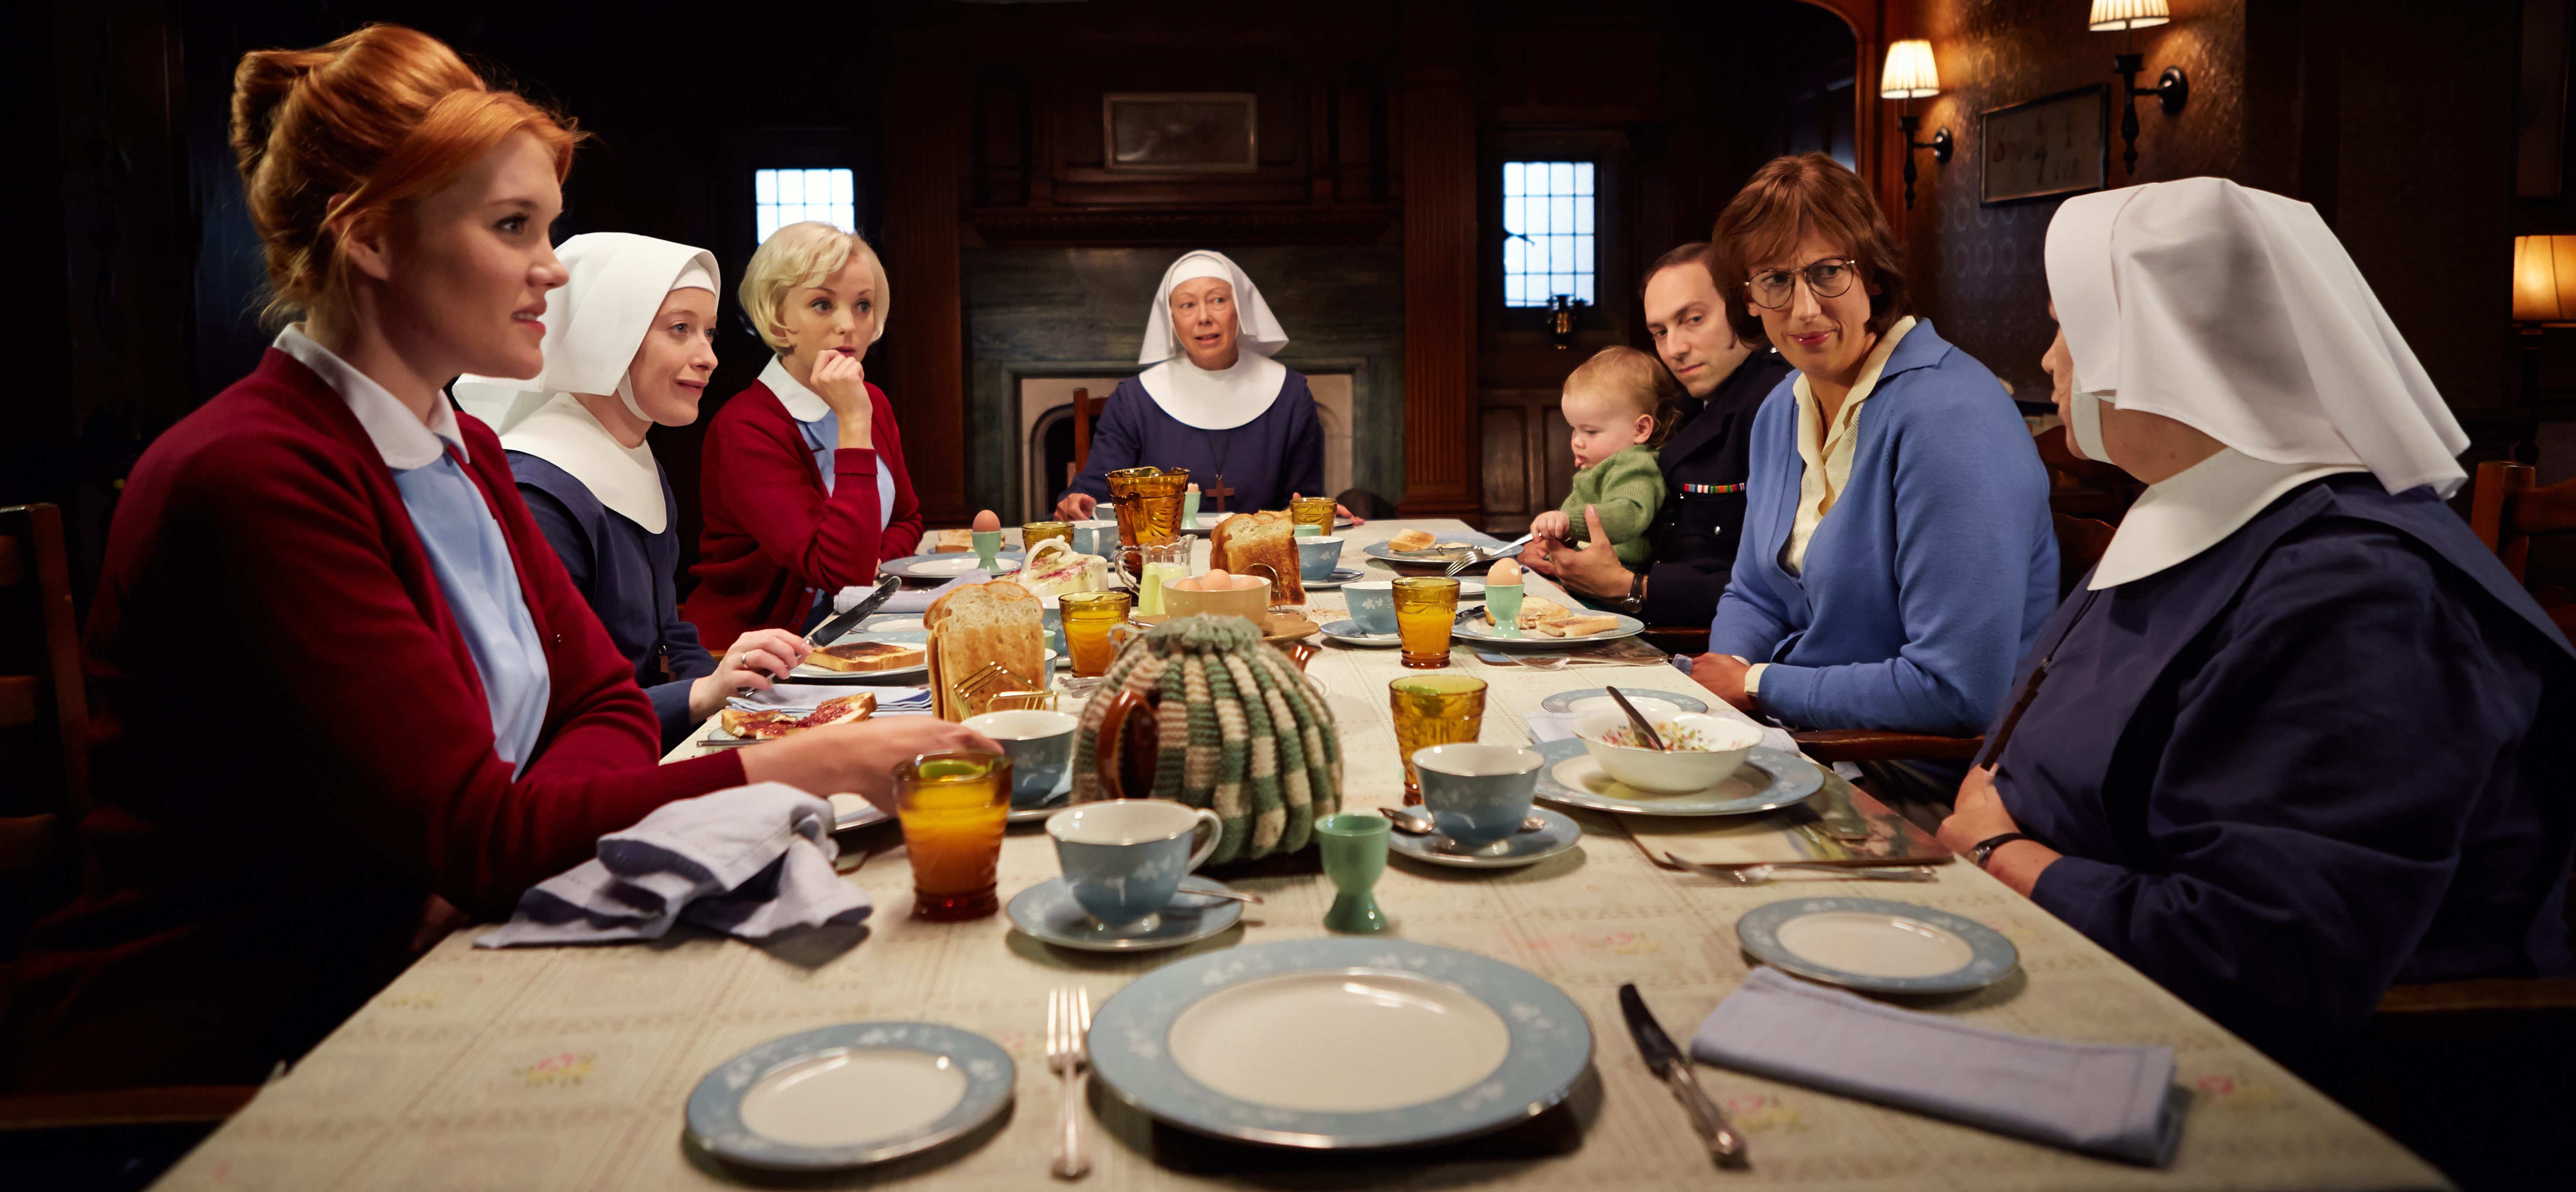 The gang's all here for "Call the Midwife" Season 4! (Photo: Courtesy of Laurence Cendrowicz/© Neal Street Productions)